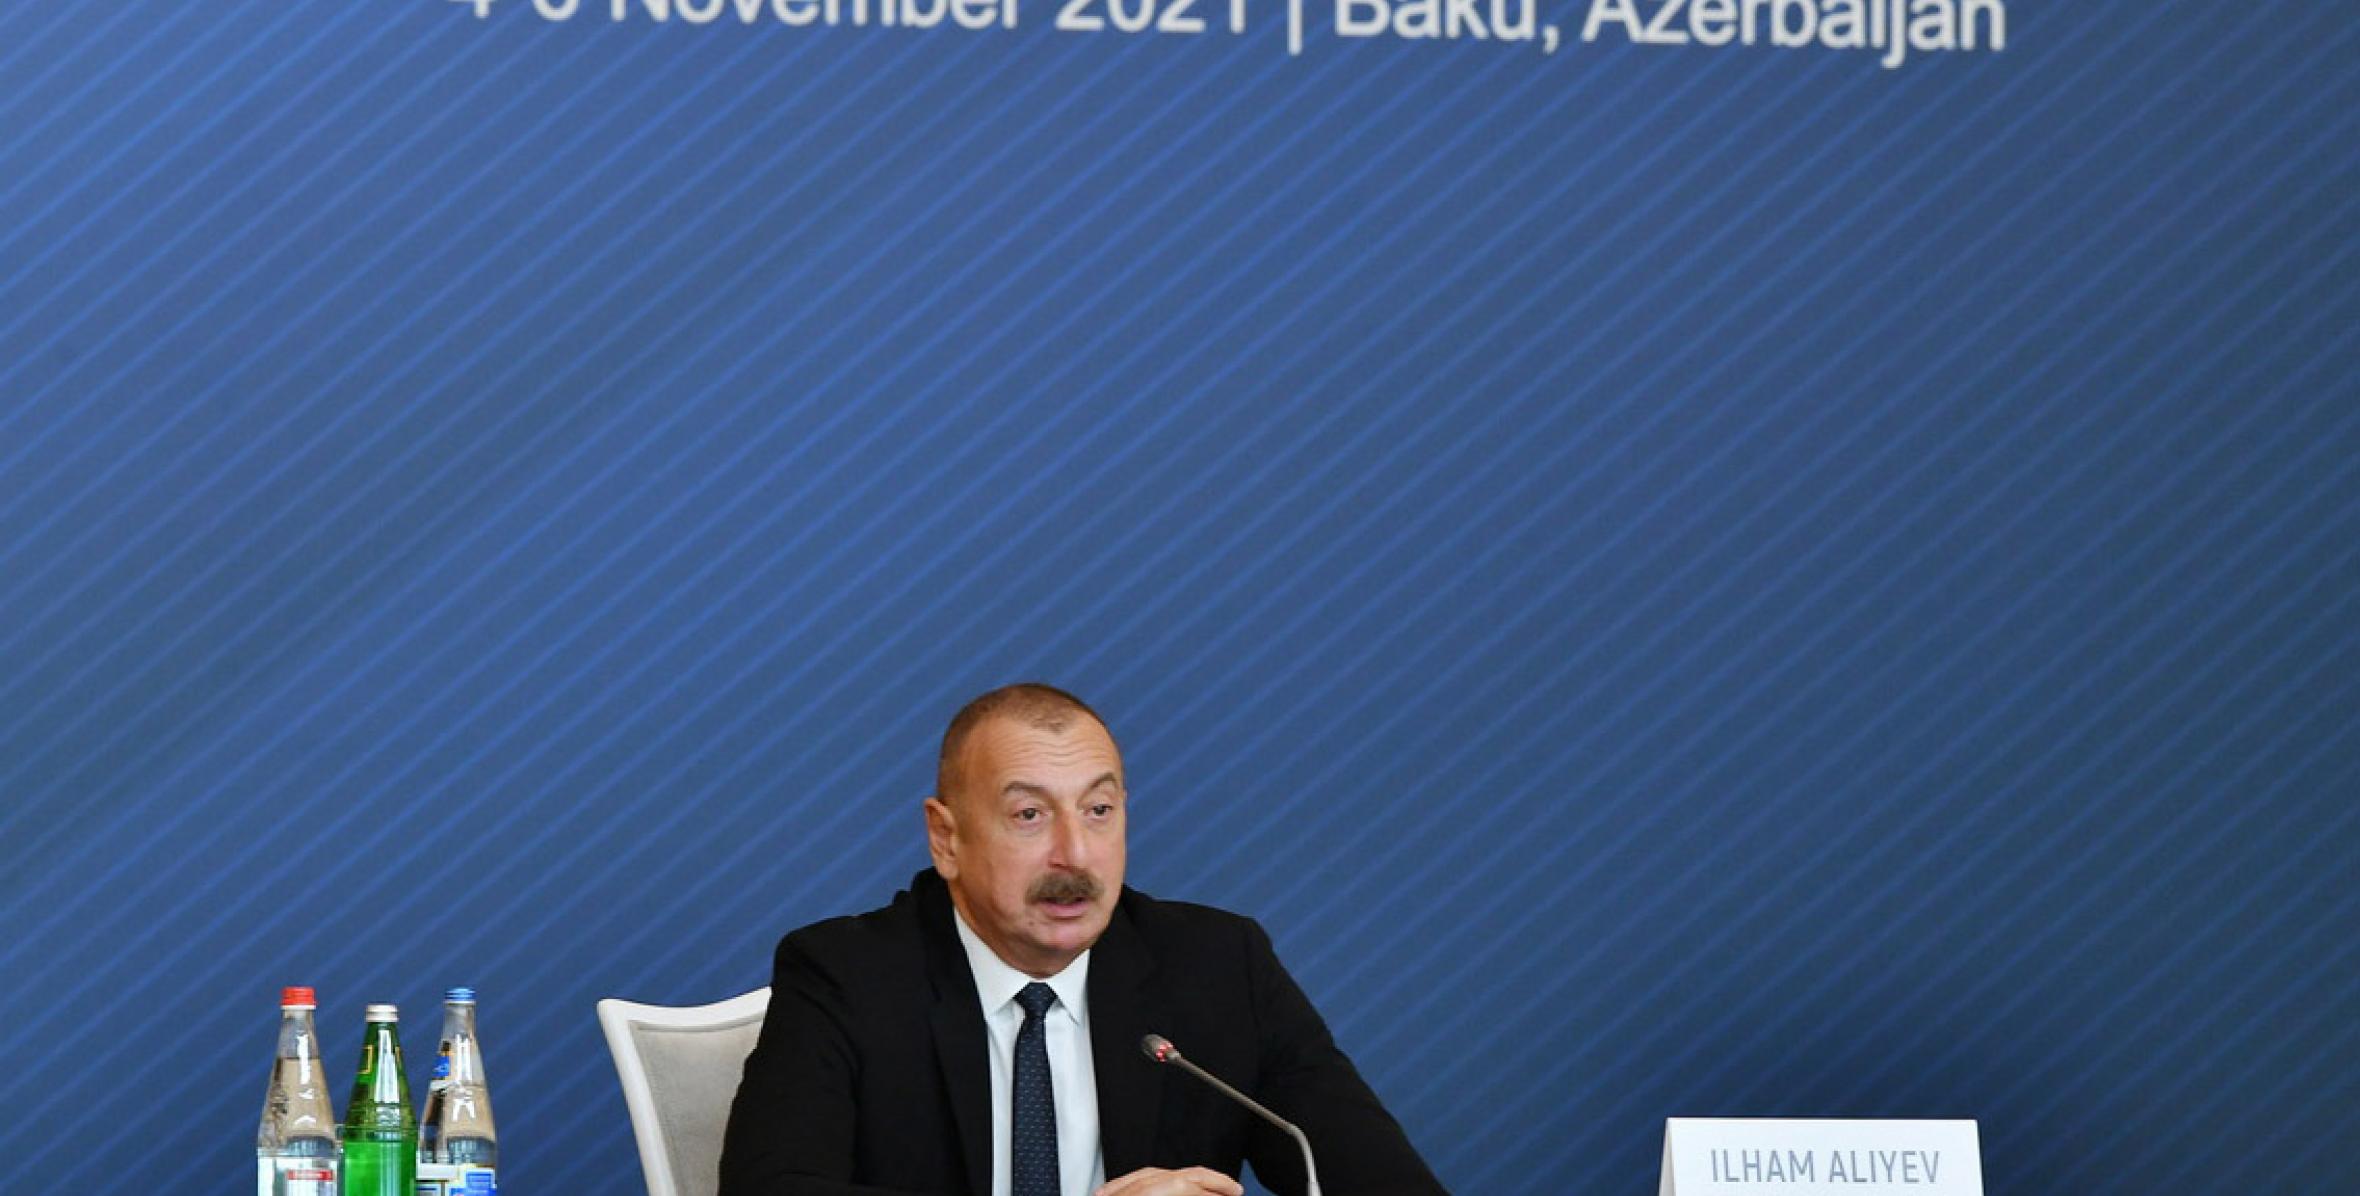 Speech by Ilham Aliyev at the opening of the 8th Global Baku Forum